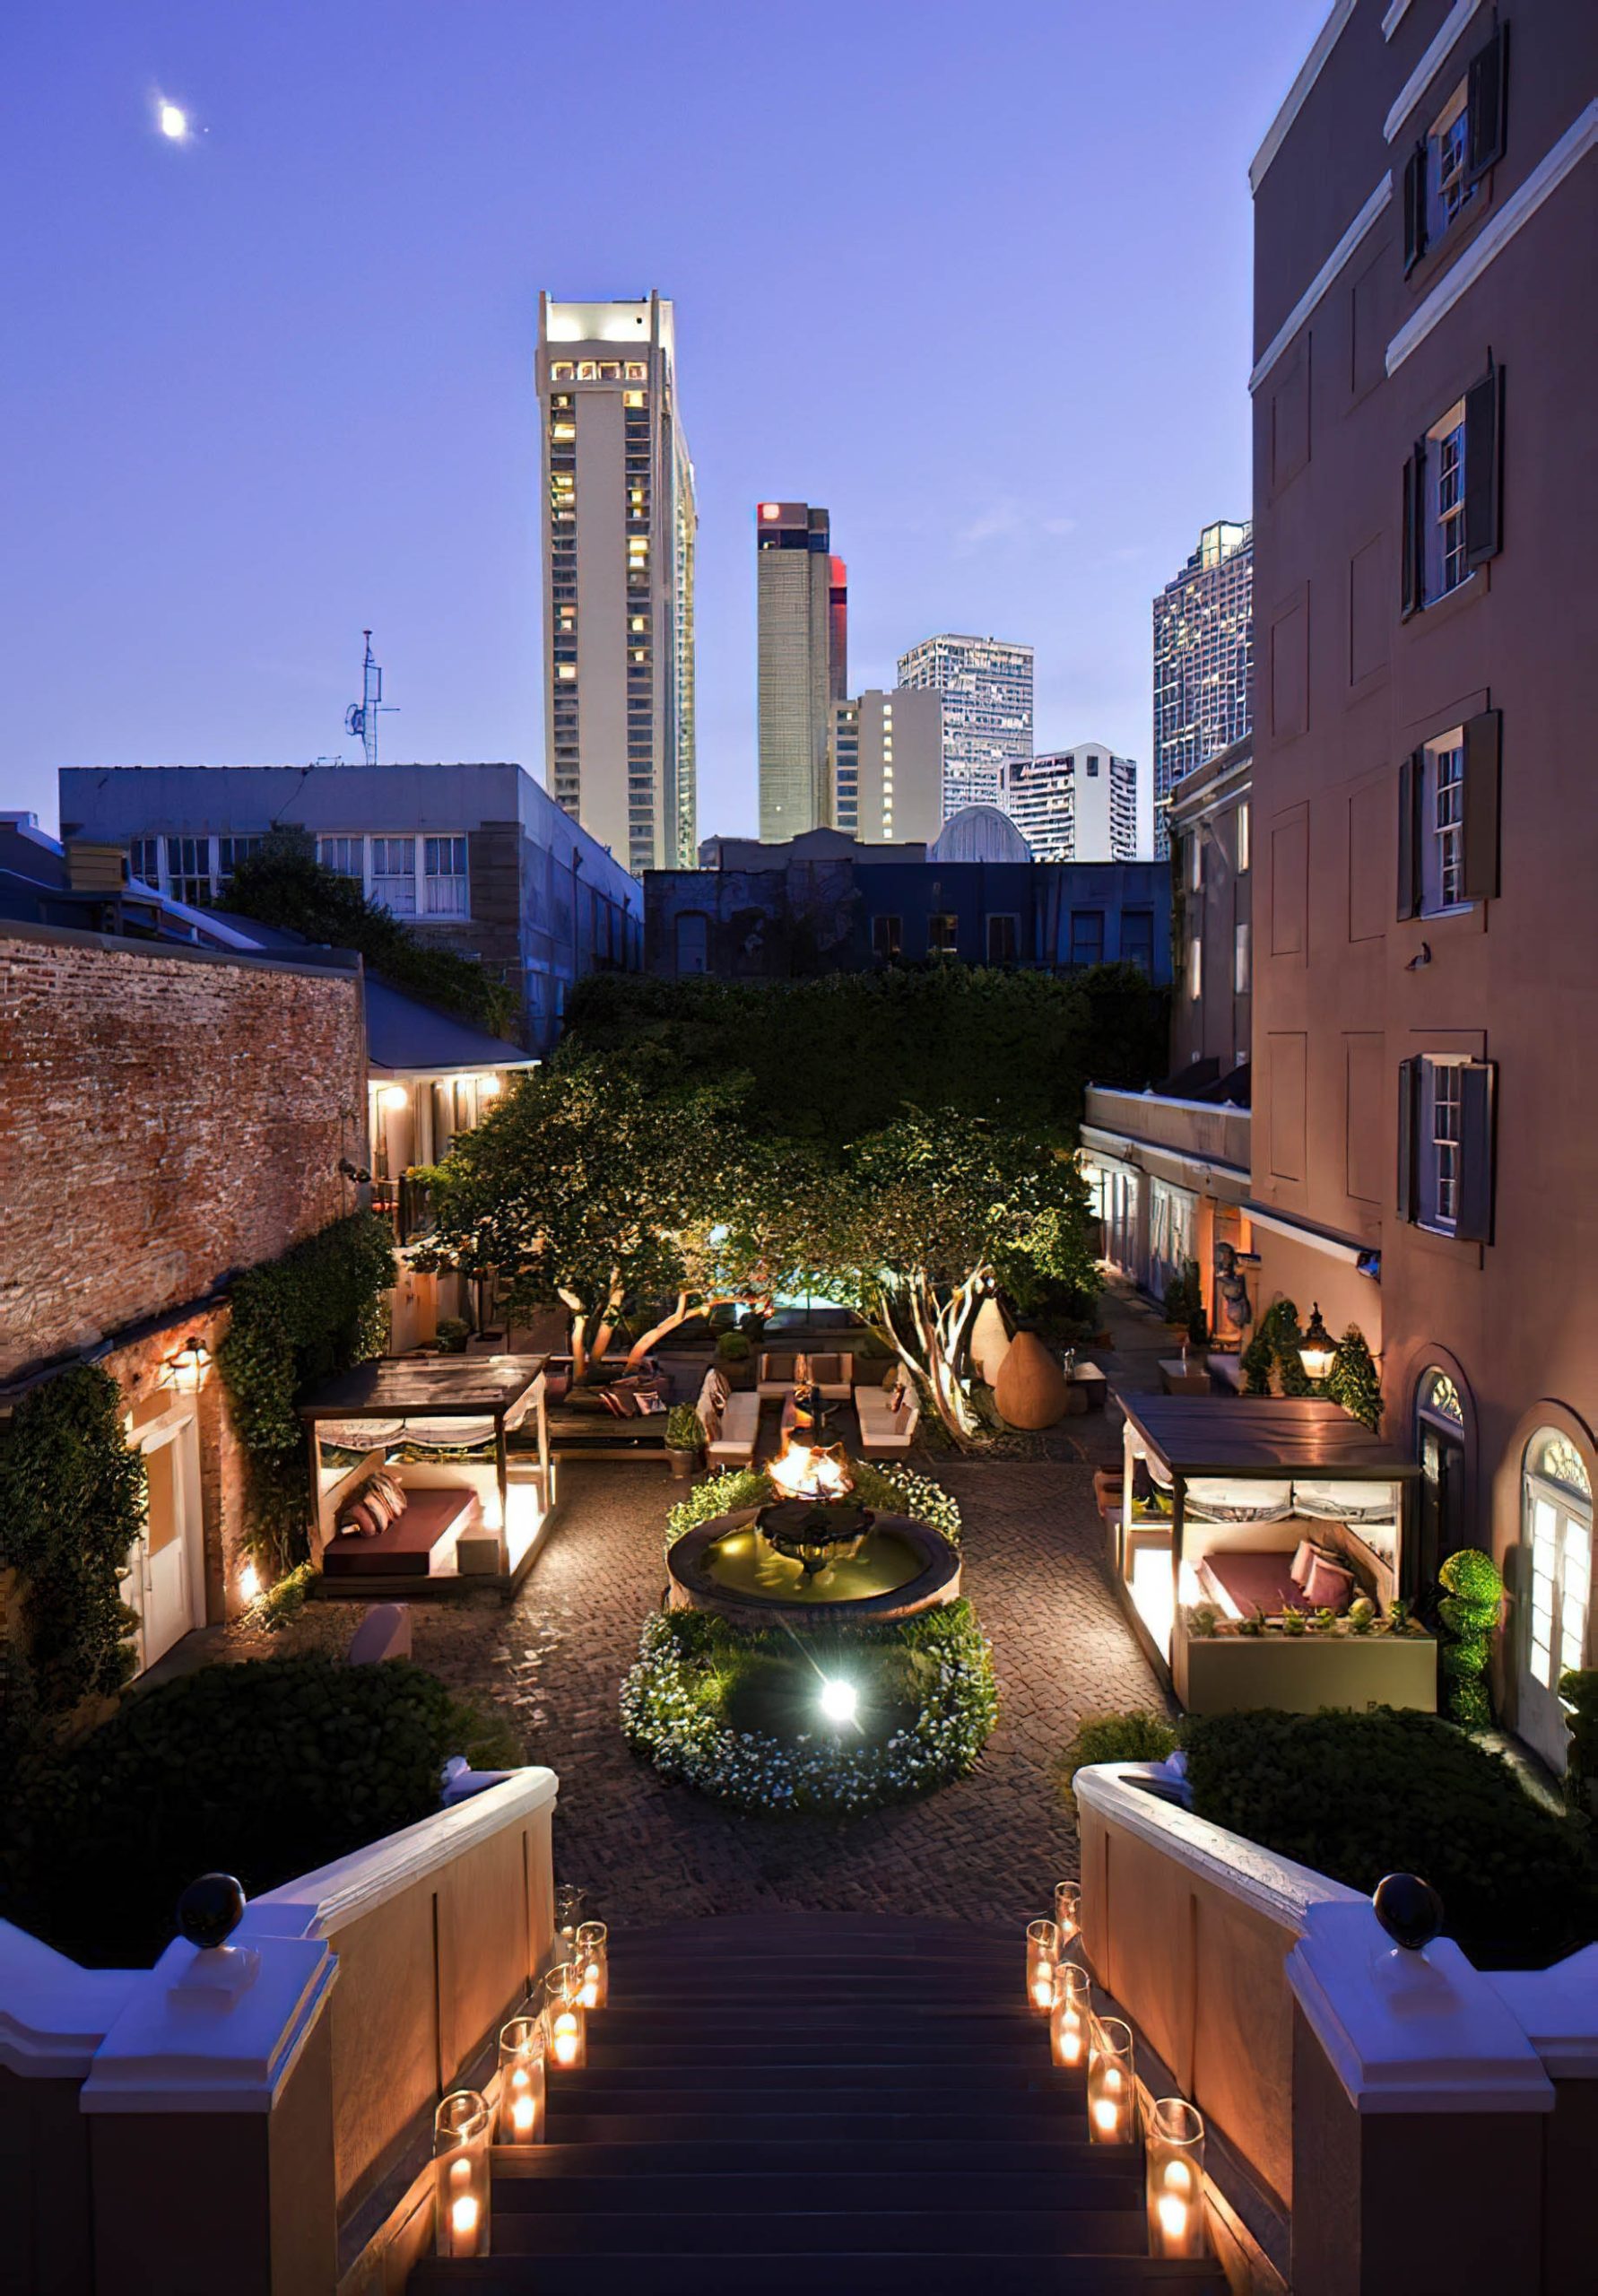 W New Orleans French Quarter Hotel – New Orleans, LA, USA – Courtyard Night View